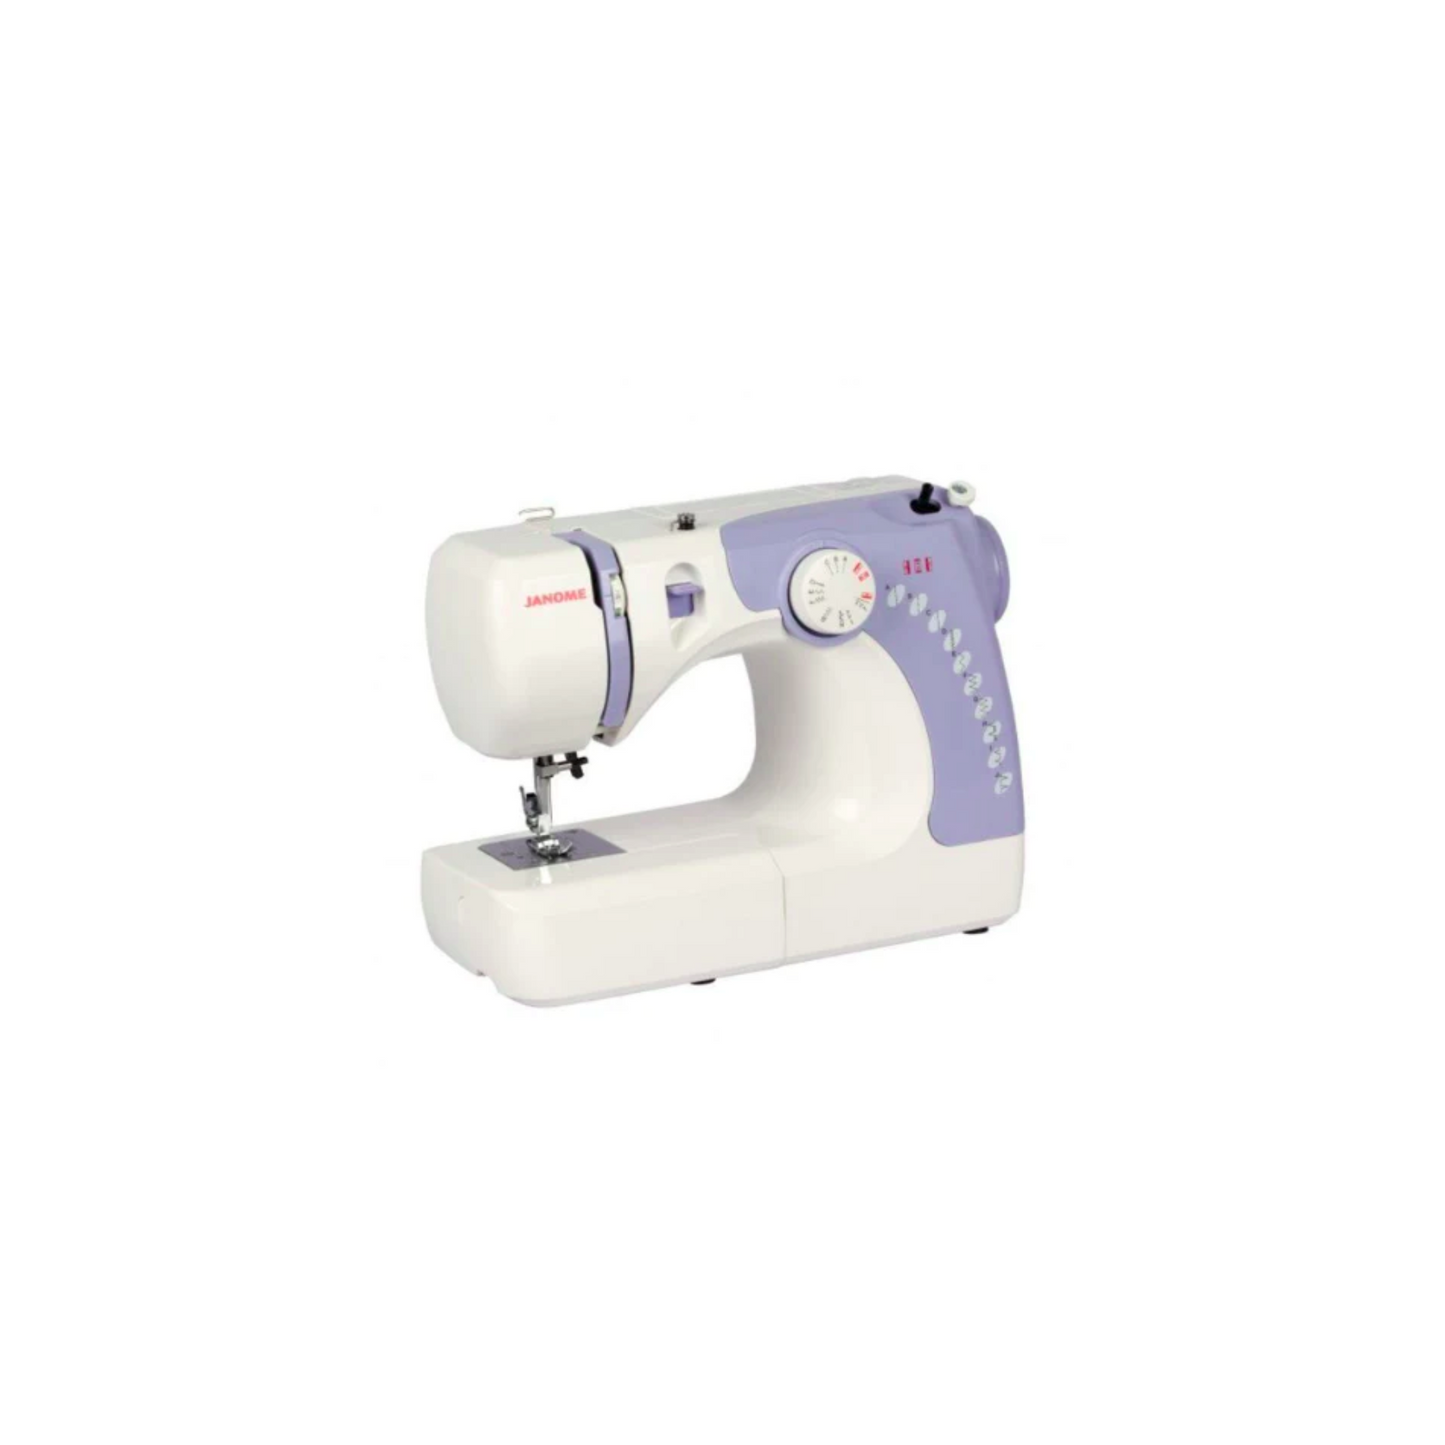 Janome 639x - Sewing machine - White - Side view